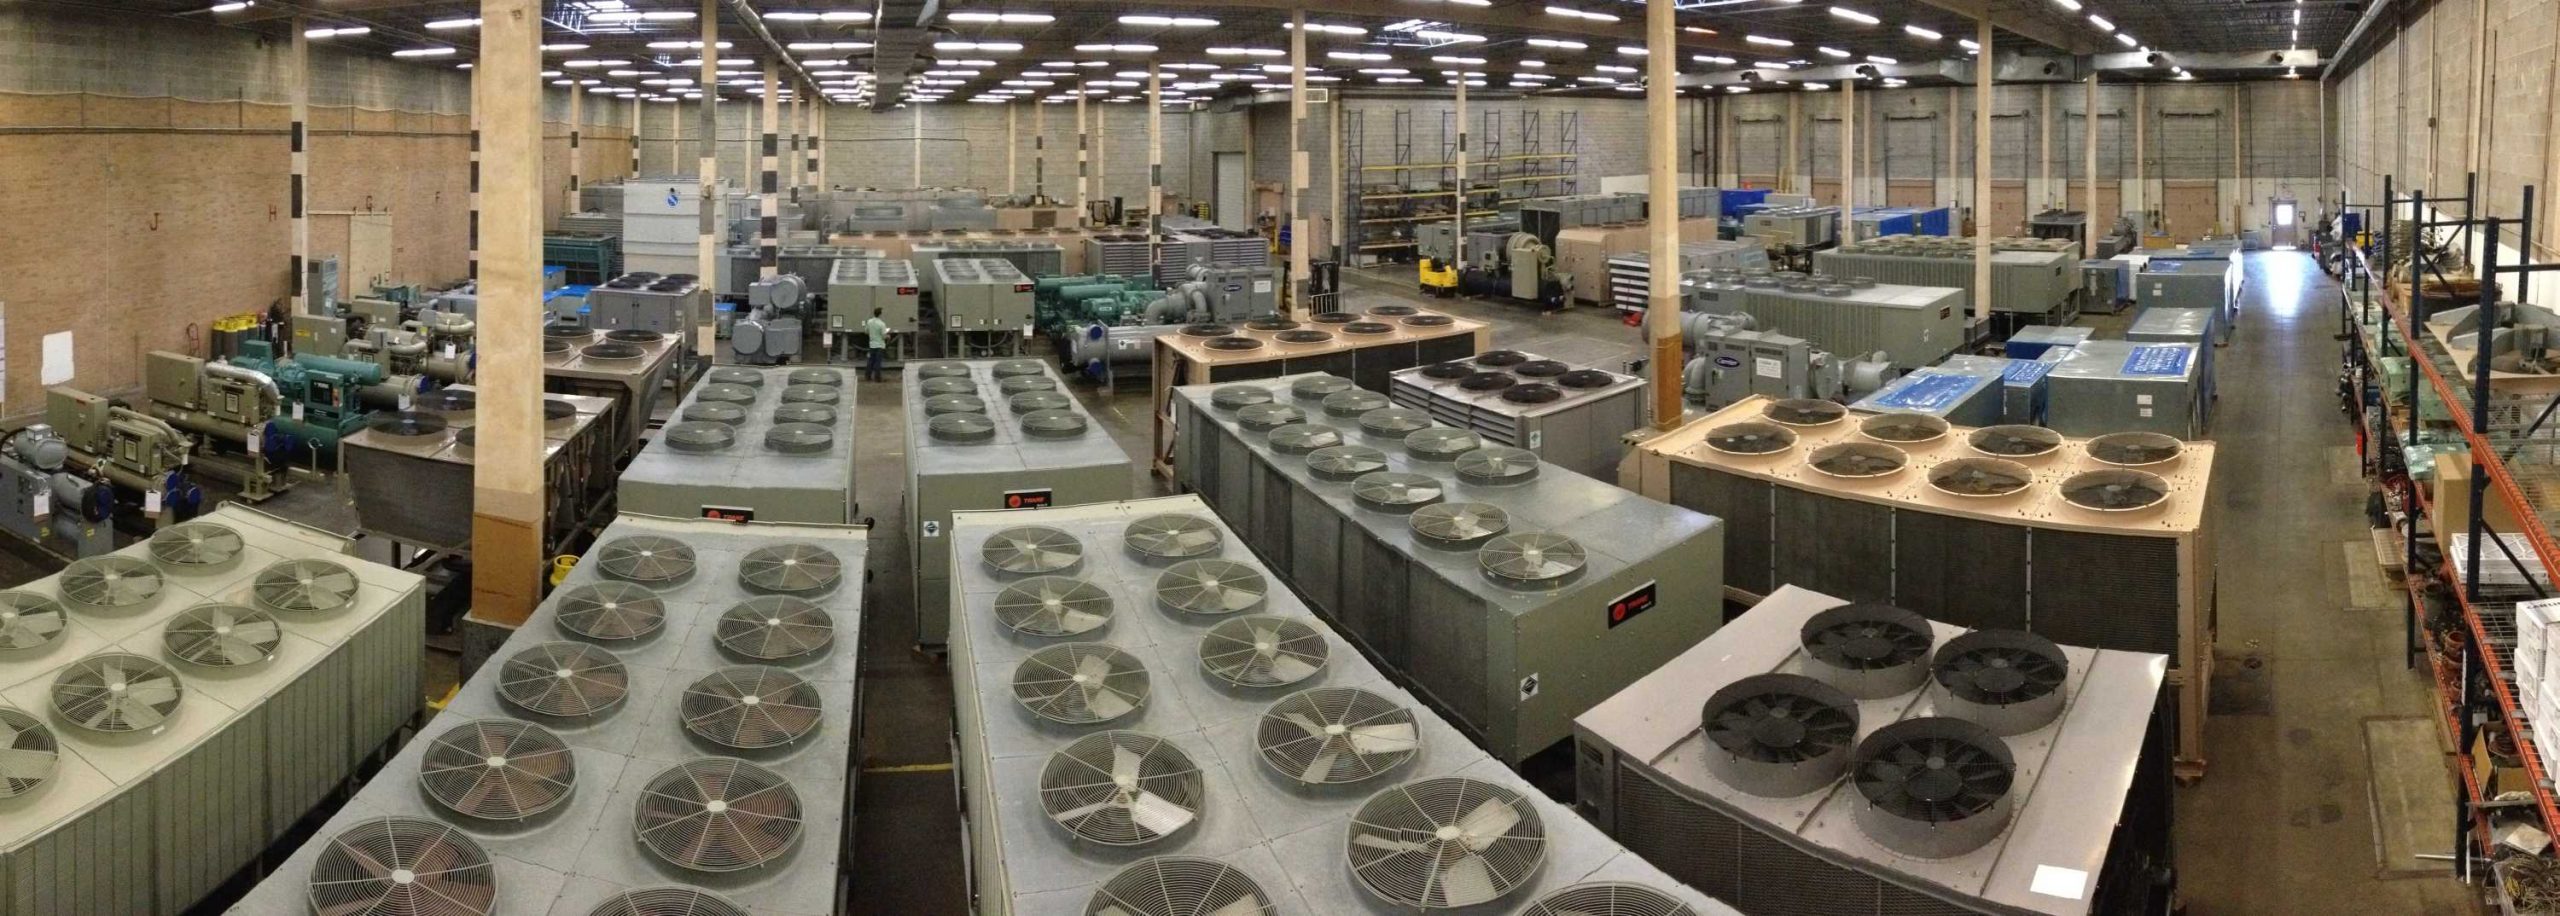 Surplus Group 100 Used Chillers in Stock